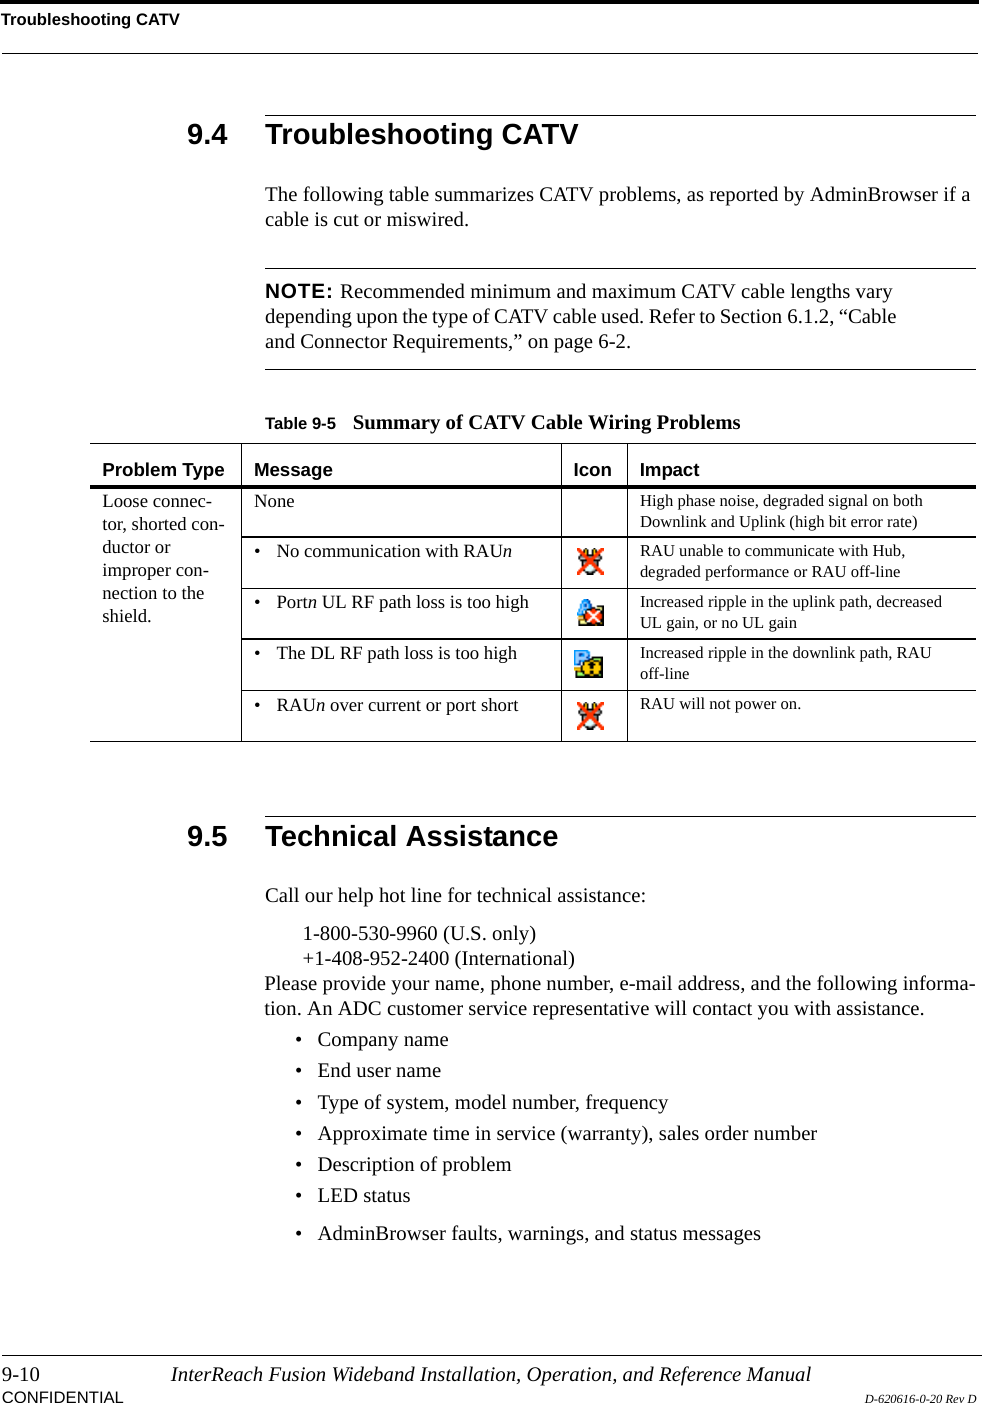 Troubleshooting CATV9-10 InterReach Fusion Wideband Installation, Operation, and Reference ManualCONFIDENTIAL D-620616-0-20 Rev D9.4 Troubleshooting CATVThe following table summarizes CATV problems, as reported by AdminBrowser if a cable is cut or miswired.NOTE: Recommended minimum and maximum CATV cable lengths vary depending upon the type of CATV cable used. Refer to Section 6.1.2, “Cable and Connector Requirements,” on page 6-2.9.5 Technical AssistanceCall our help hot line for technical assistance:1-800-530-9960 (U.S. only)+1-408-952-2400 (International)Please provide your name, phone number, e-mail address, and the following informa-tion. An ADC customer service representative will contact you with assistance.• Company name• End user name• Type of system, model number, frequency• Approximate time in service (warranty), sales order number• Description of problem• LED status• AdminBrowser faults, warnings, and status messagesTable 9-5 Summary of CATV Cable Wiring ProblemsProblem Type Message Icon ImpactLoose connec-tor, shorted con-ductor or improper con-nection to the shield.None High phase noise, degraded signal on both Downlink and Uplink (high bit error rate)• No communication with RAUn  RAU unable to communicate with Hub, degraded performance or RAU off-line• Portn UL RF path loss is too high Increased ripple in the uplink path, decreased UL gain, or no UL gain• The DL RF path loss is too high Increased ripple in the downlink path, RAU off-line•RAUn over current or port short RAU will not power on.